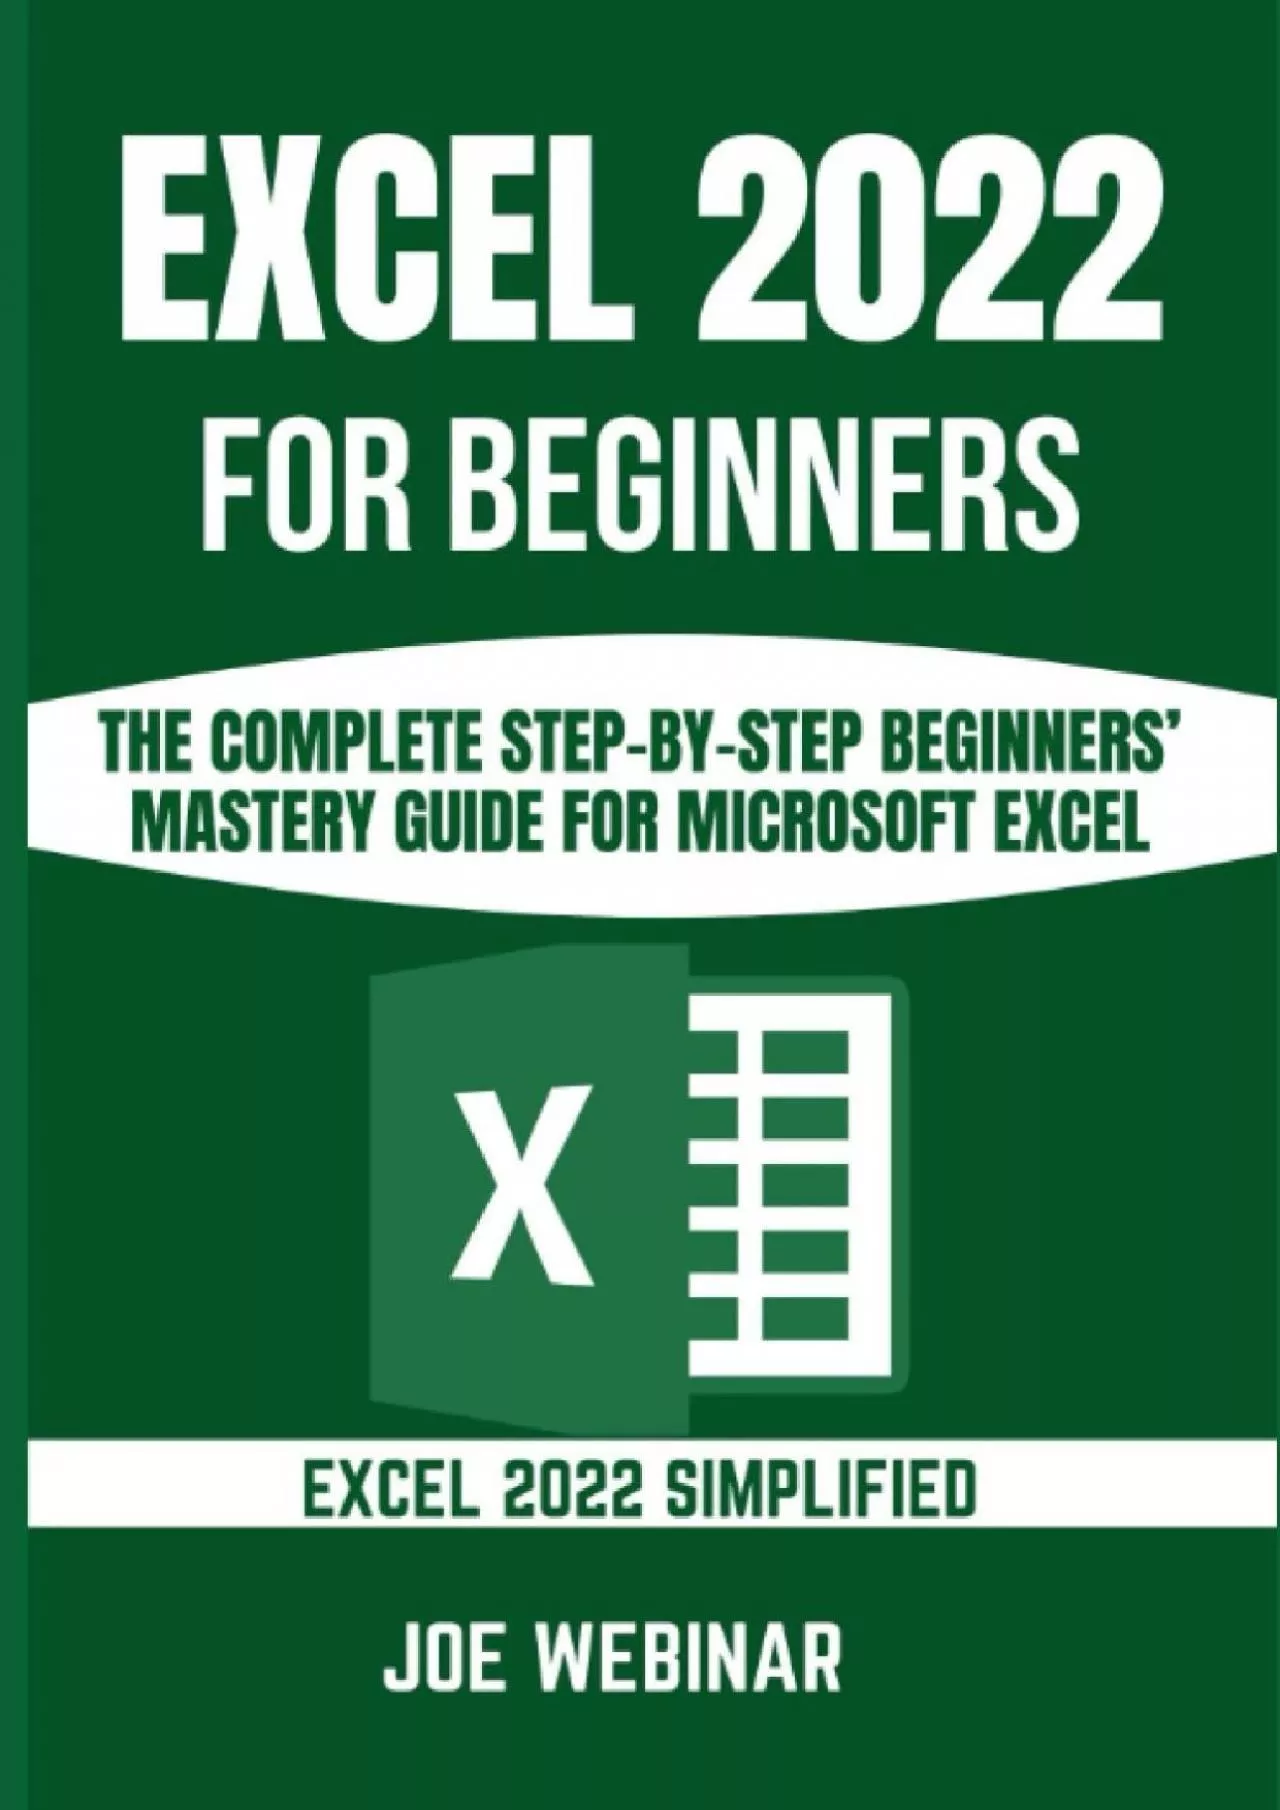 EXCEL 2022 FOR BEGINNERS: THE COMPLETE STEP-BY-STEP BEGINNERS’ MASTERY GUIDE FOR MICROSOFT